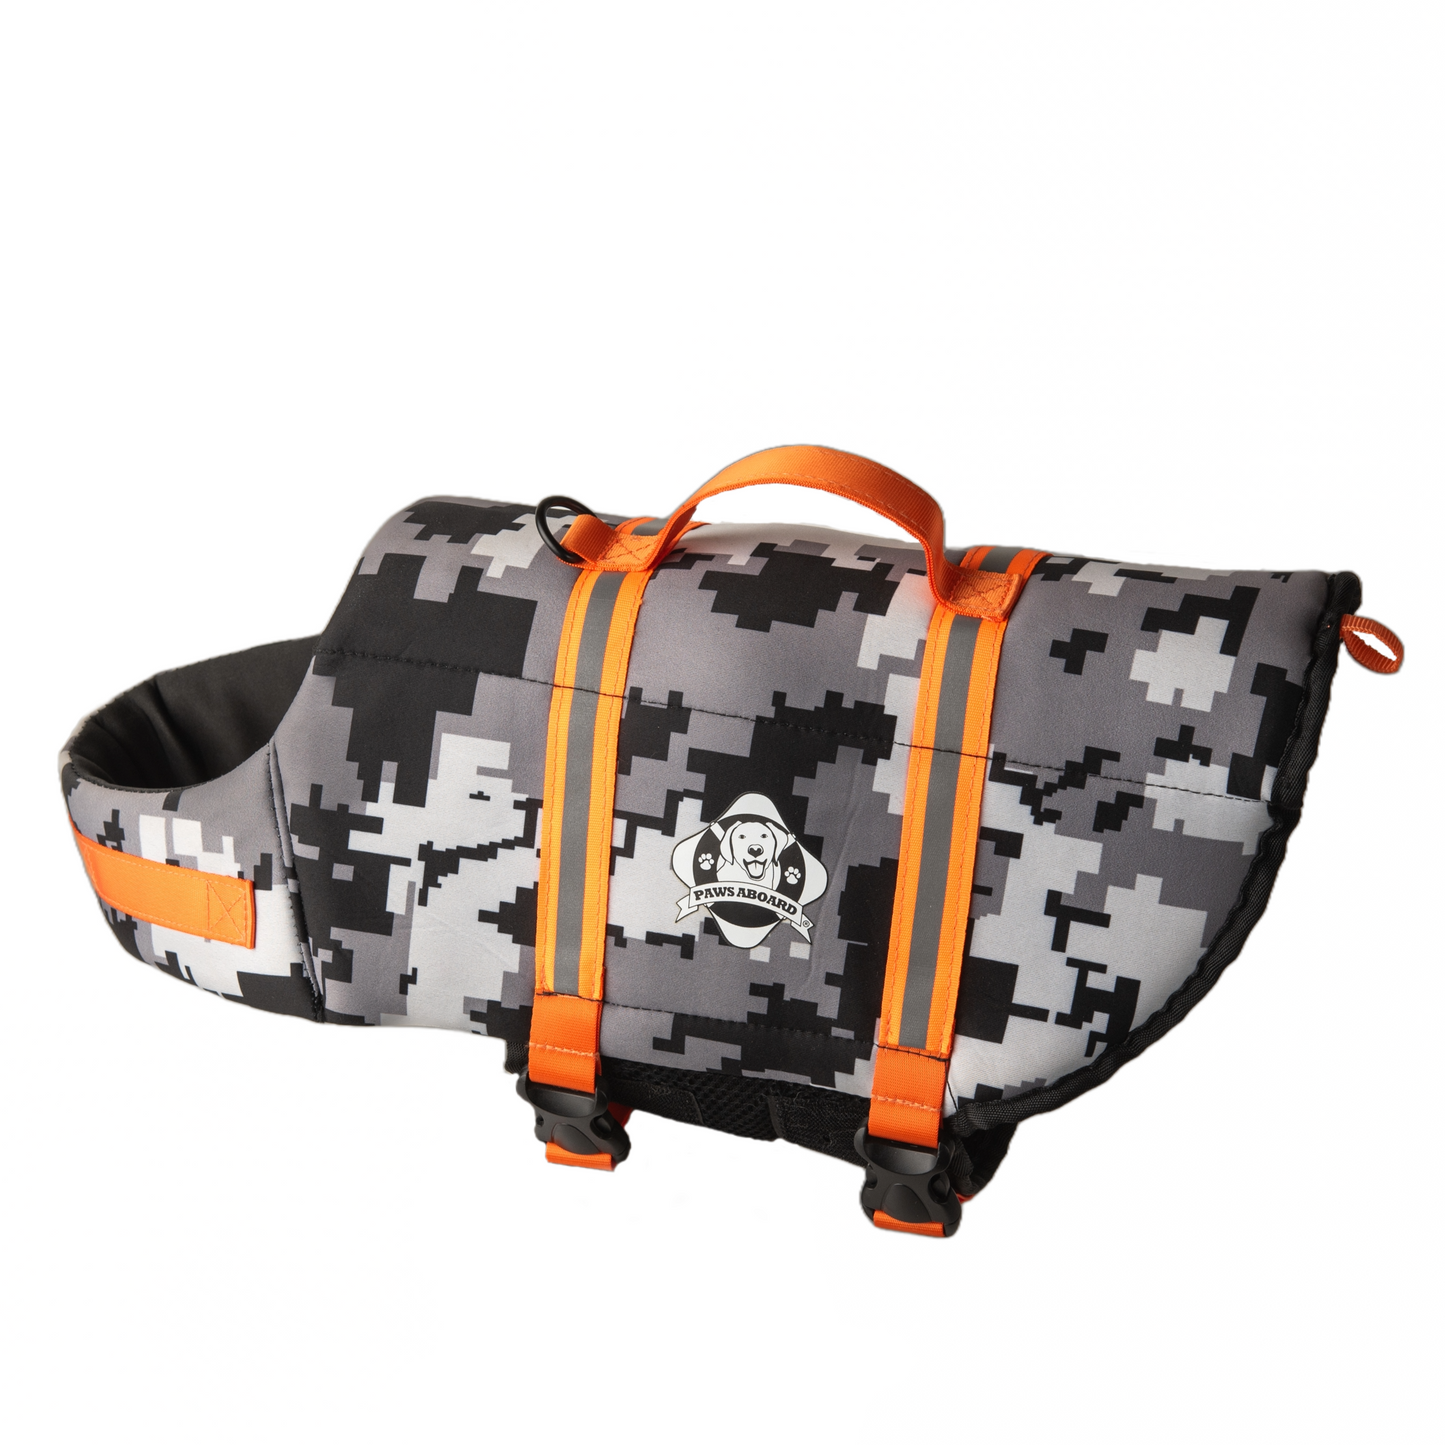 Black and grey digital camouflage dog life jacket with fluorescent orange reflective straps and top rescue handle. Paws Aboard logo on side of neoprene jacket centered between the straps.